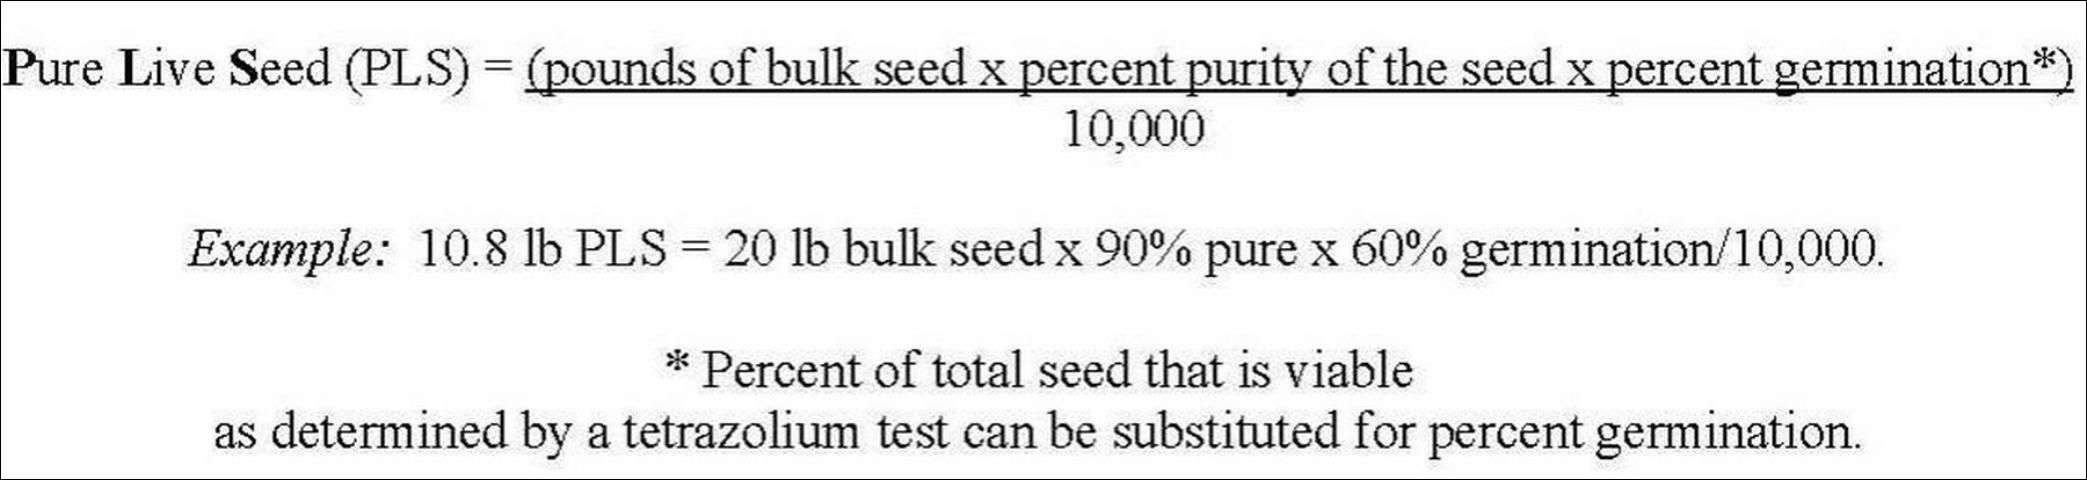 Figure 4. How to calculate Pure Live Seed (PLS)